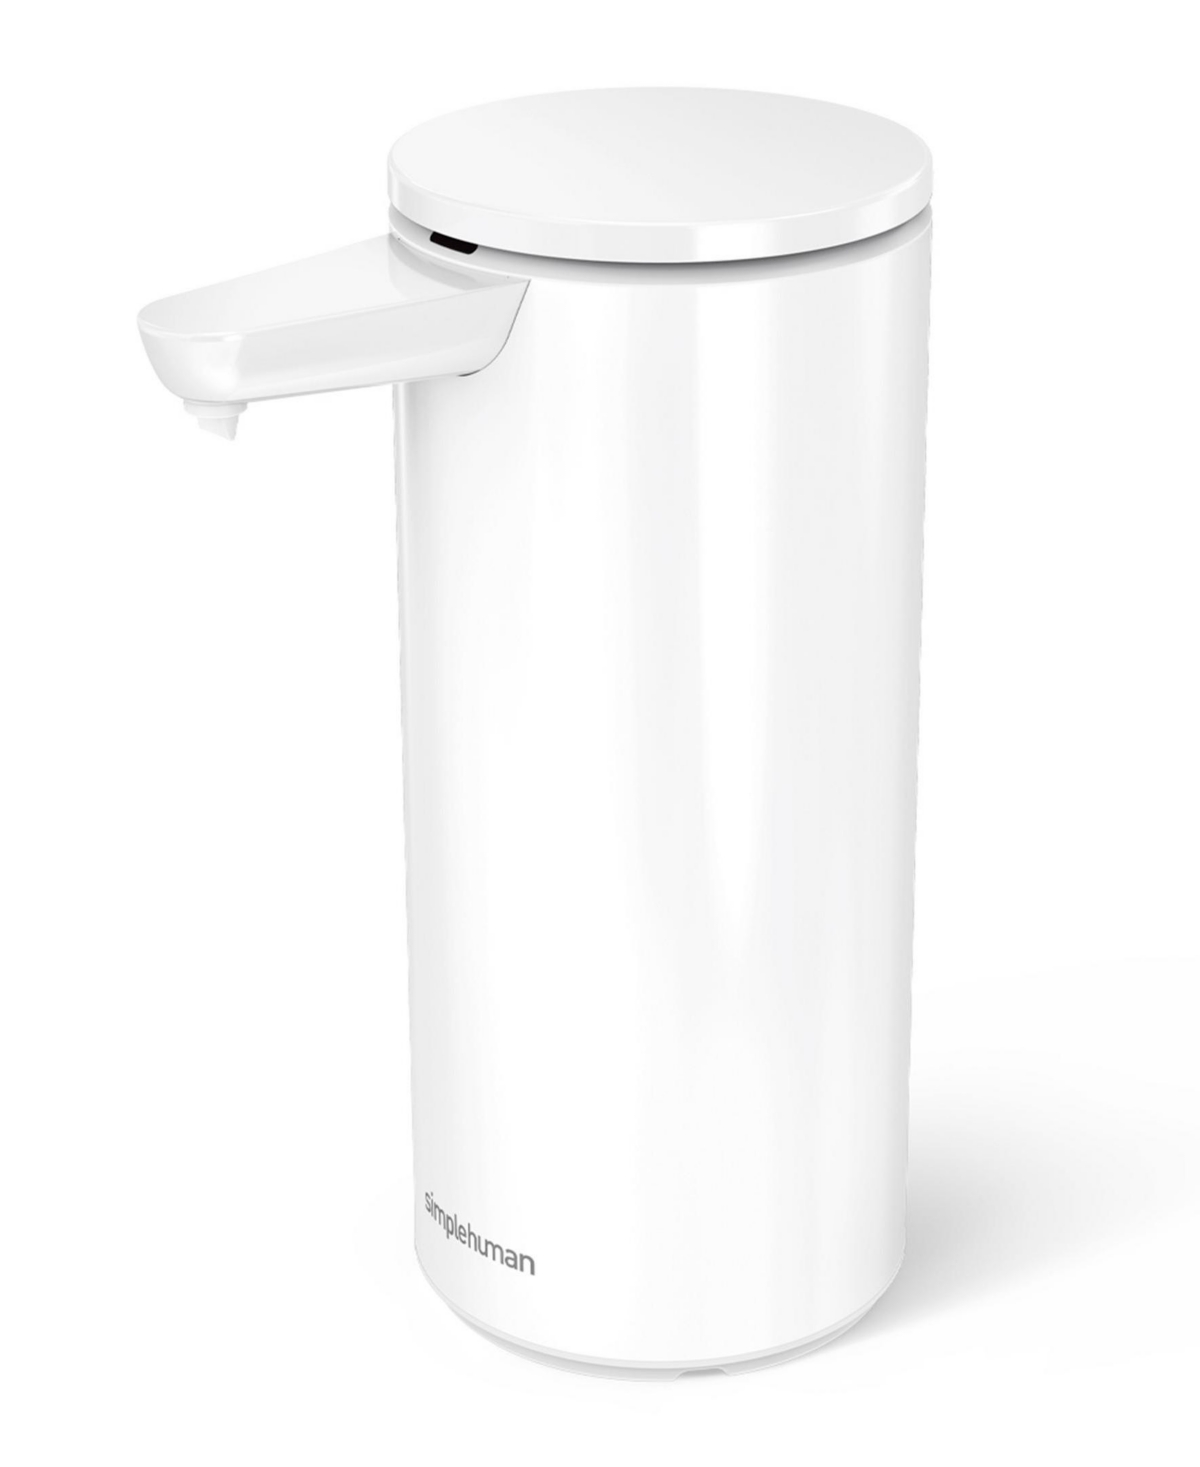 Simplehuman Rechargeable Sensor Soap Pump, 14 oz In White Stainless Steel